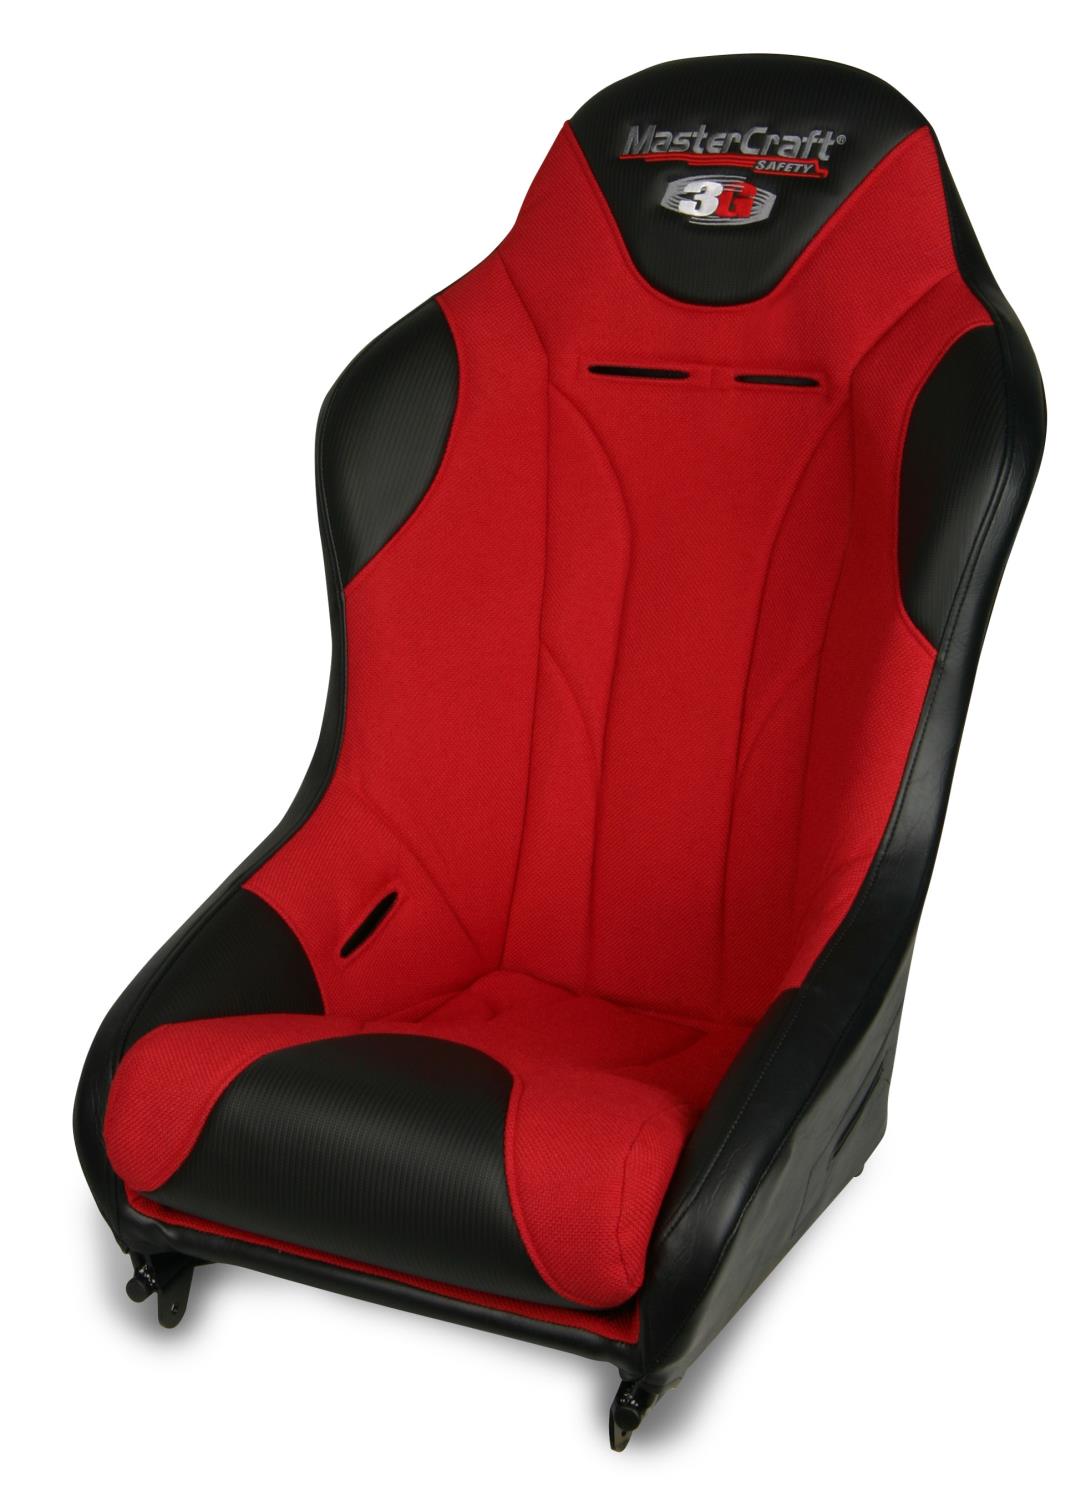 572022 1 in. WIDER 3G-4 Seat w/DirtSport Stitch Pattern, Black with Red Fabric Center and Red Side Panels, Black Band